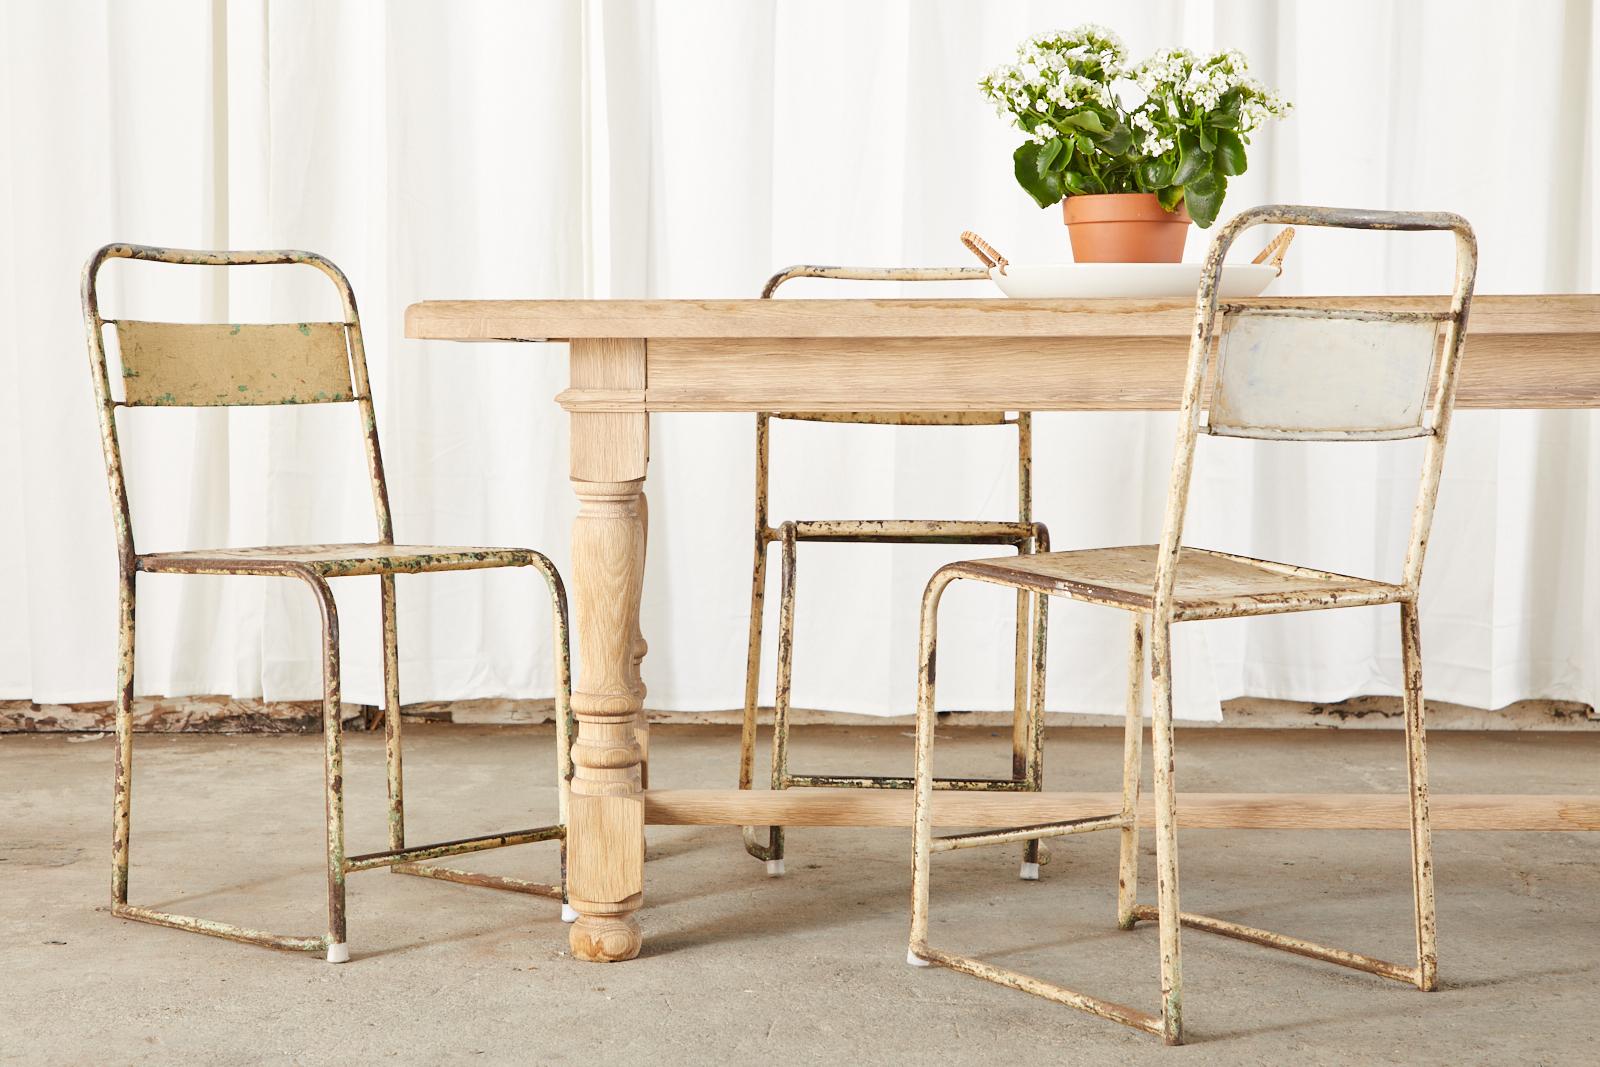 Contemporary bleached oak farmhouse dining table made in the country French style. The table features a 1.5 inch thick plank top supported by a trestle style base. The oak has a beautiful aged patina on the natural finish. Ample legroom measuring 24